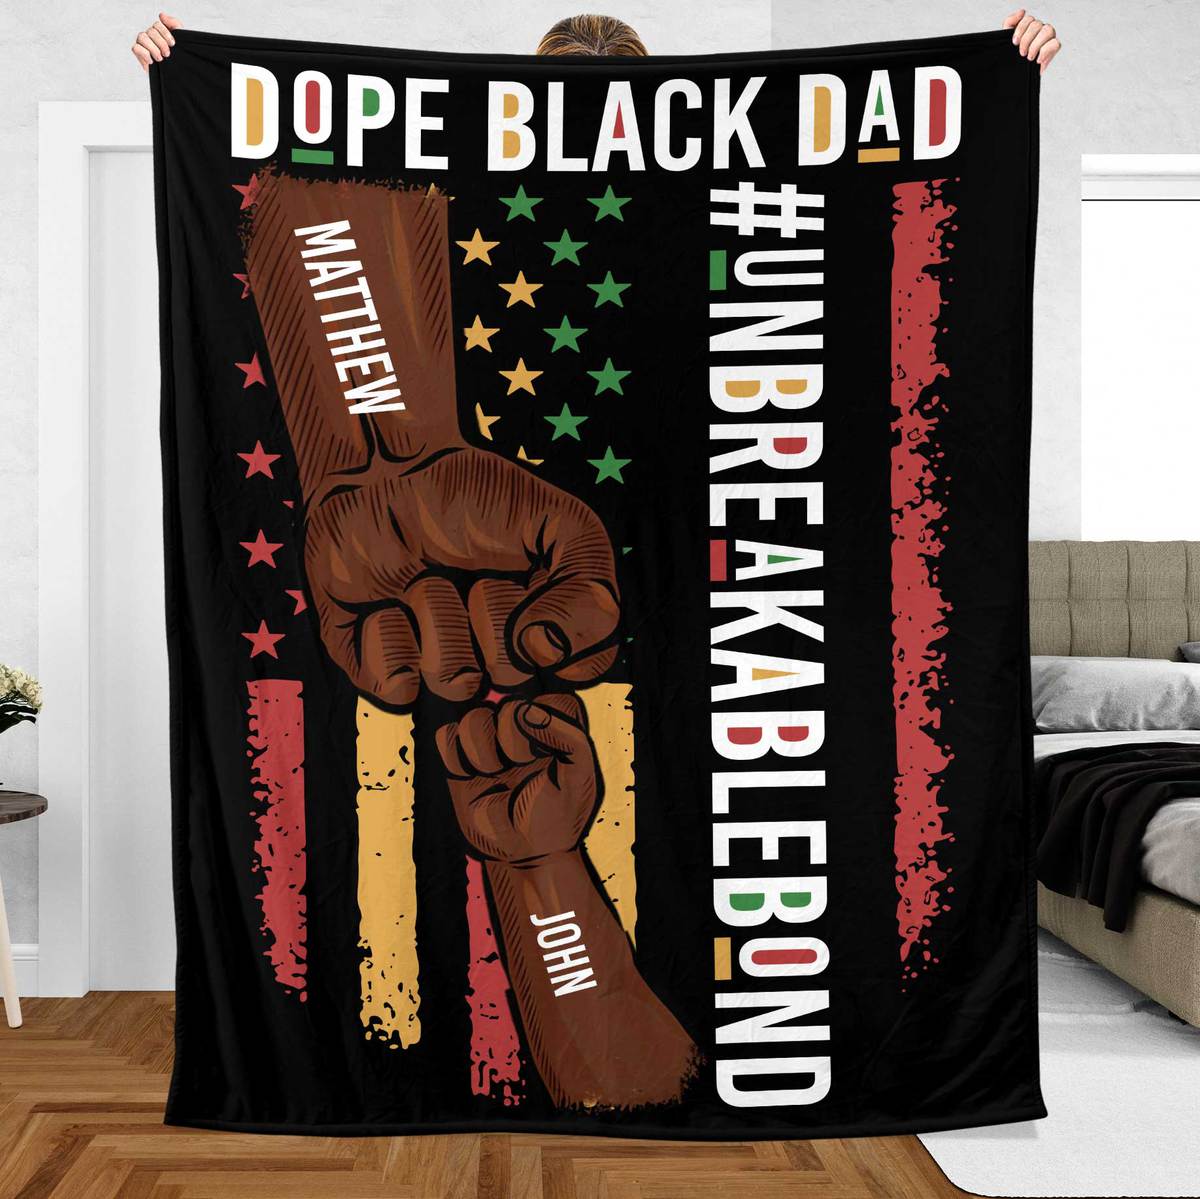 Dope Black Dad - Unbreakablebond - Personalized Blanket - Best Gift For Family - Giftago